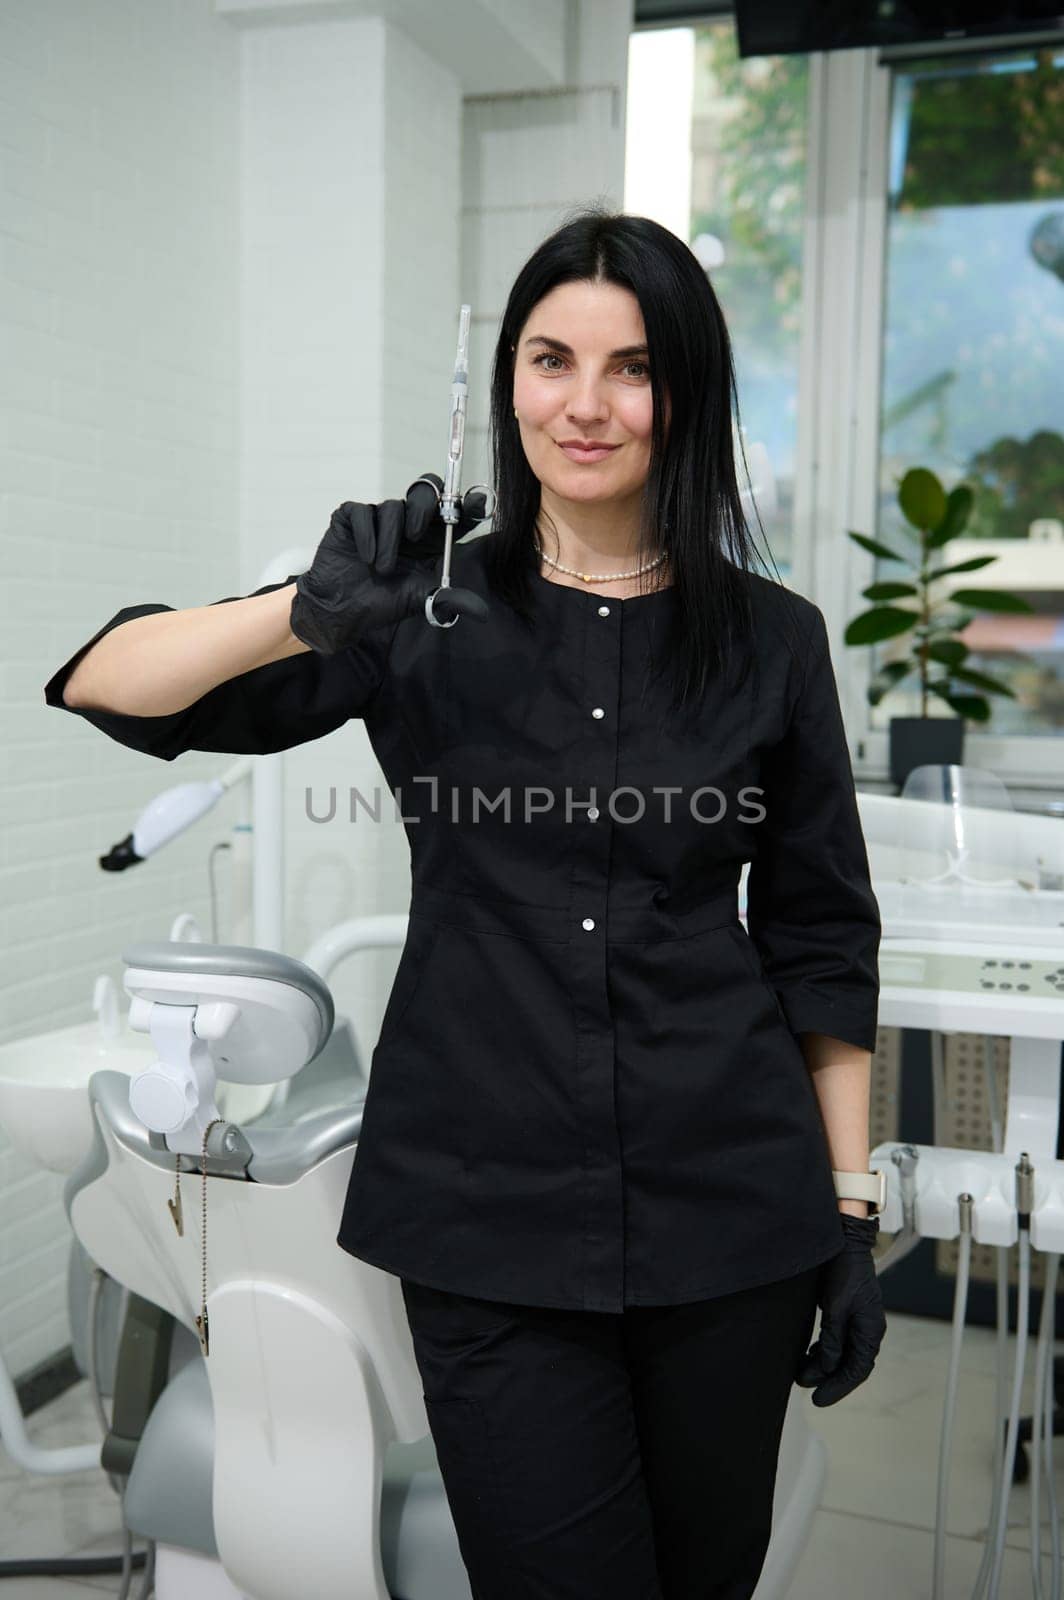 Caucasian young confident professional woman dentist doctor, dressed in stylish black medical uniform, standing by dentist's chair in the dentistry office, holding a syringe with dental anesthetic